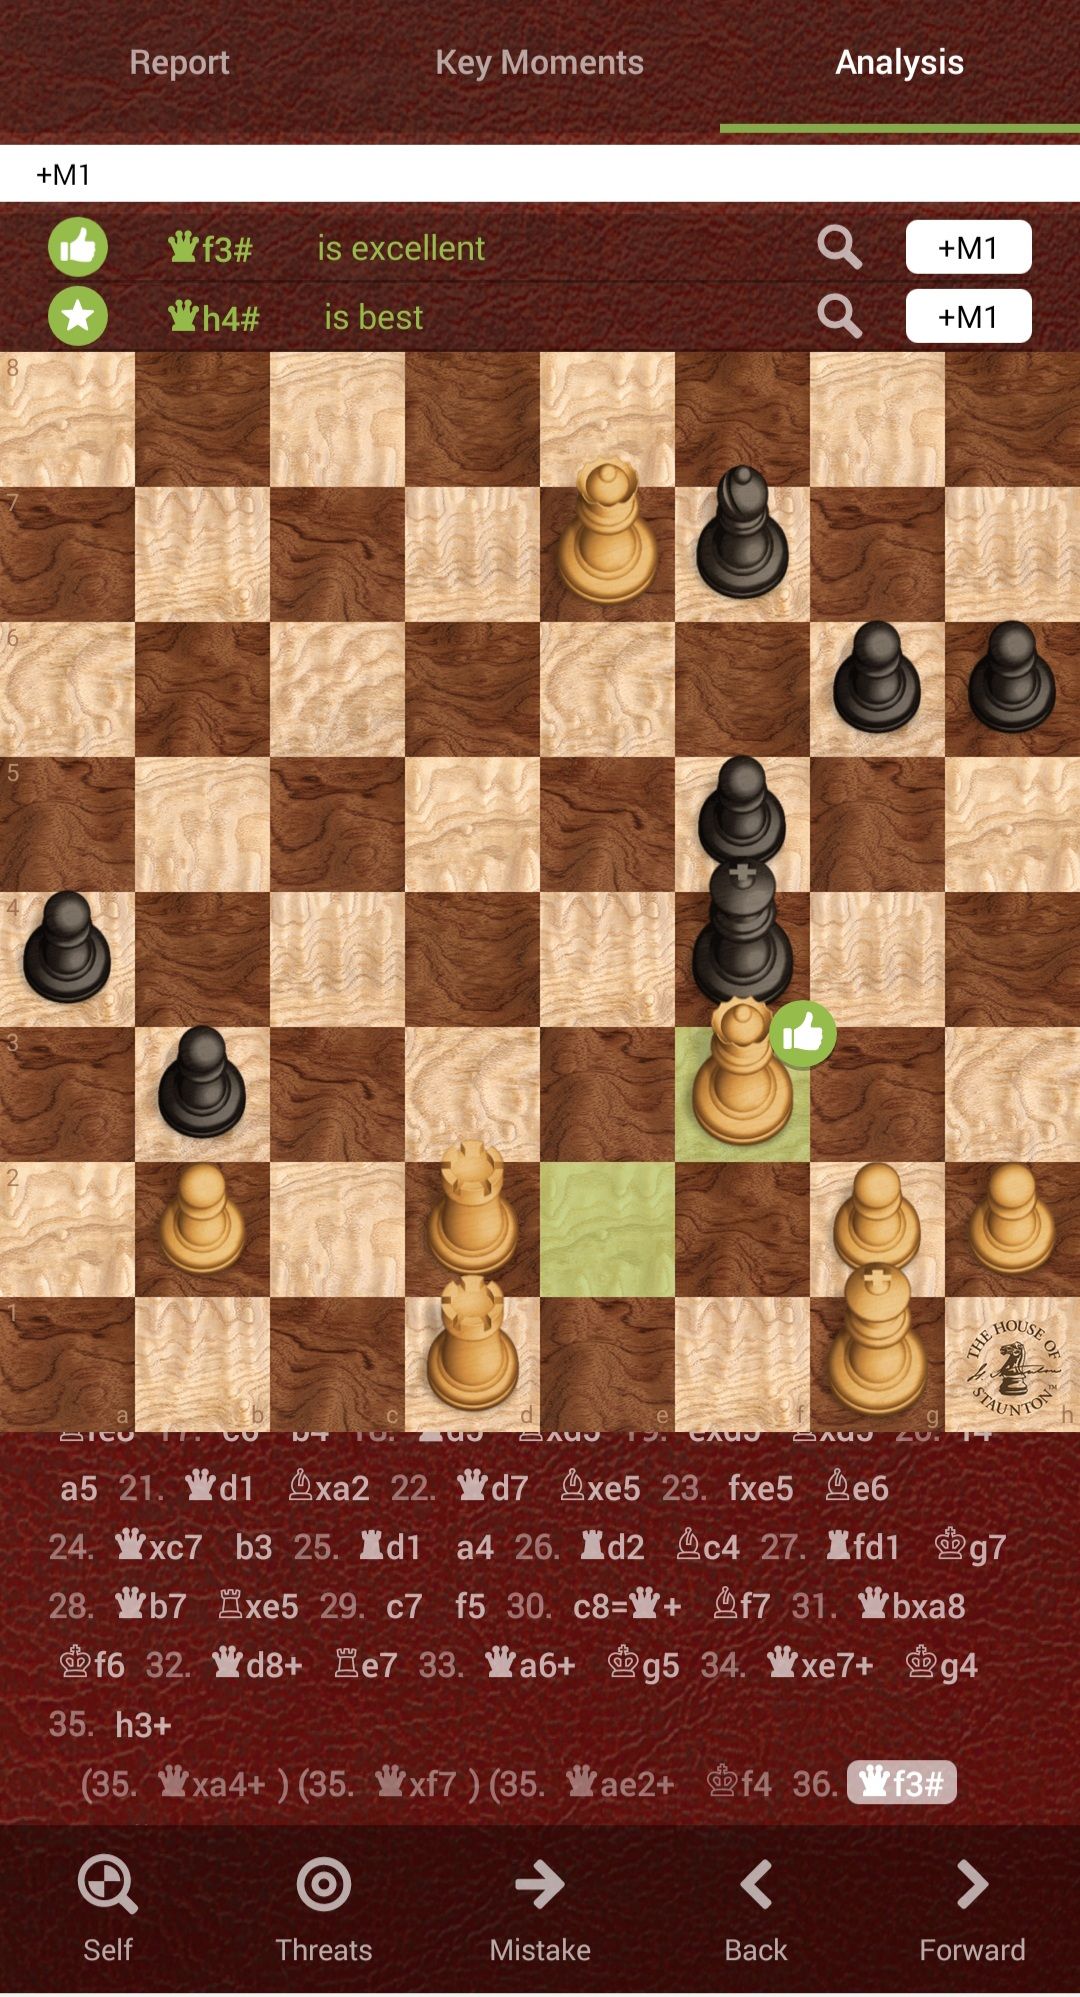 Excellent checkmates vs. best move checkmates - Chess Forums